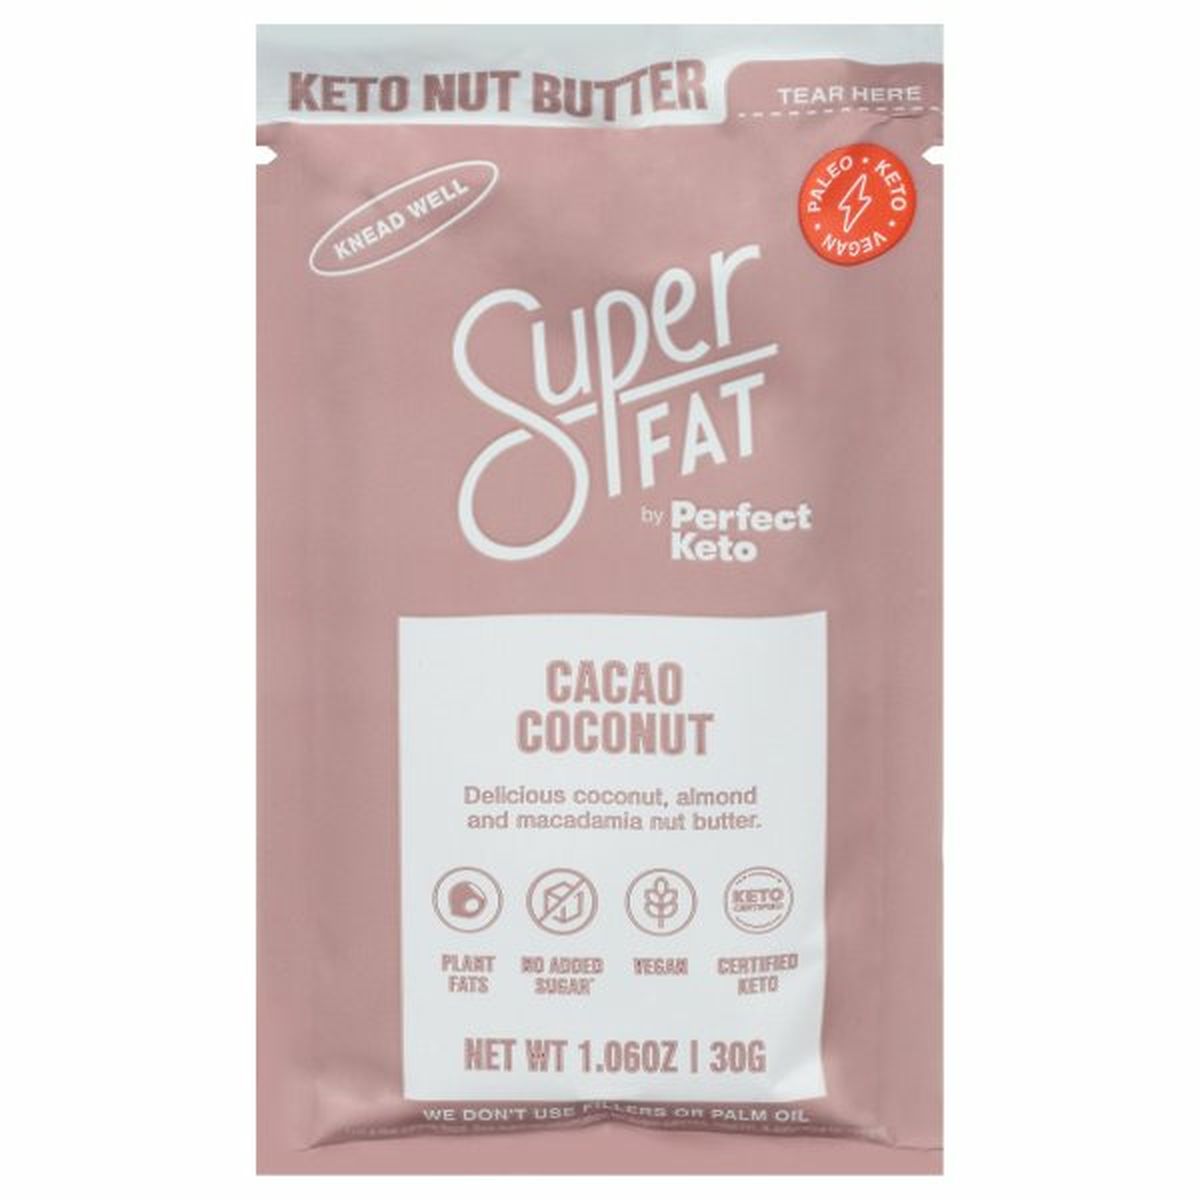 Calories in SuperFat Keto Nut Butter, Cacao Coconut